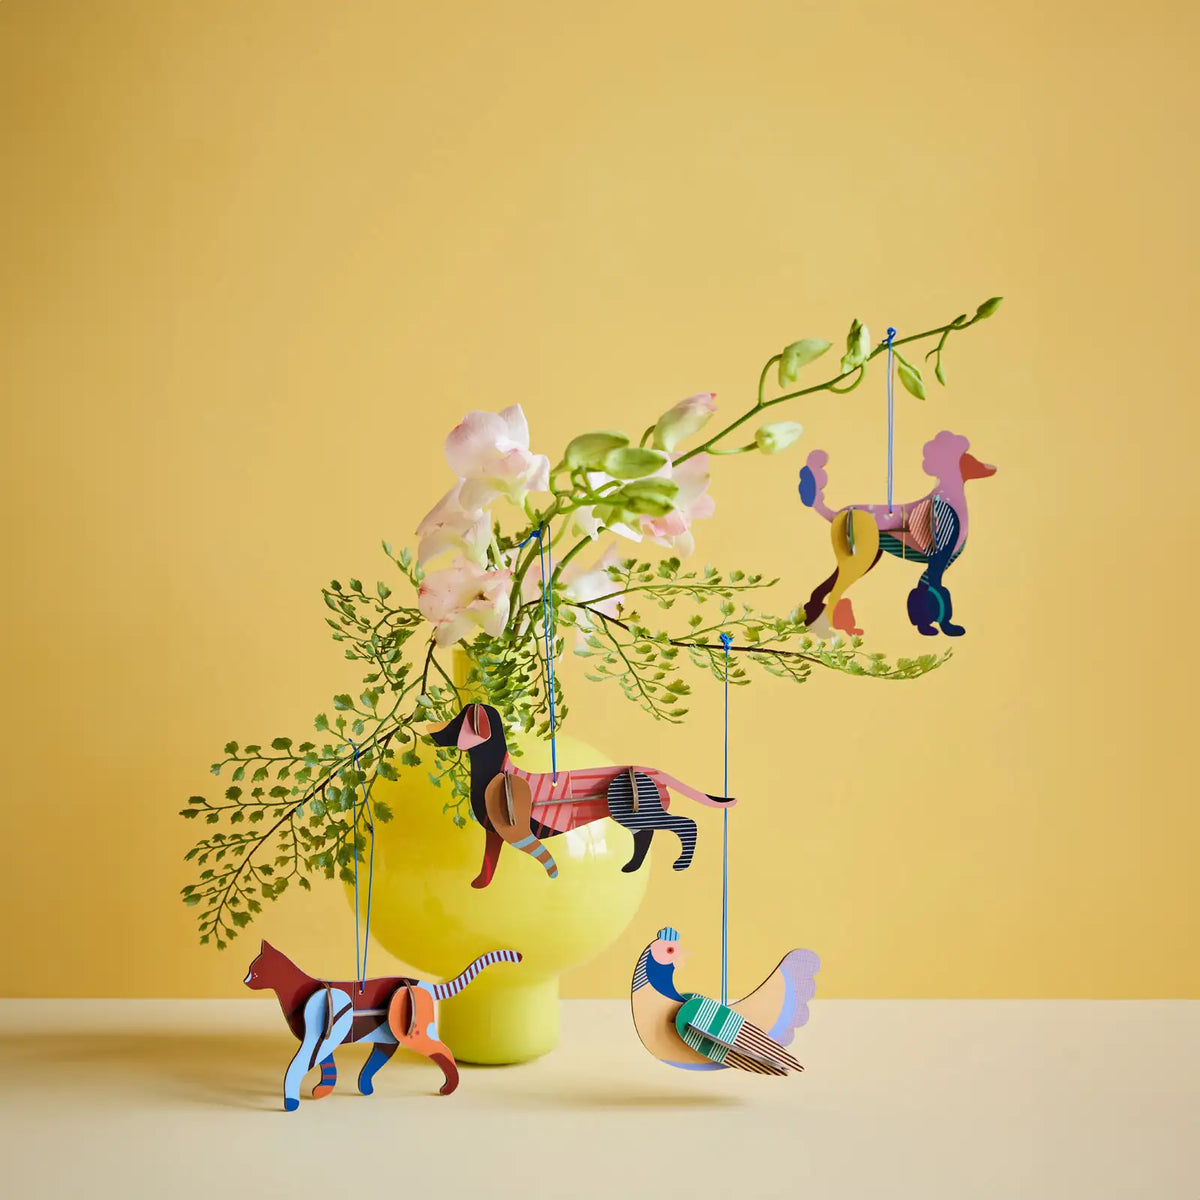 POODLE-DACHSHUND-CHICKEN-CAT_ORNAMENT-FESTIVE-PLAY-LUCKY-CHARM_Studio-Roof_OVERVIEW_PICTURE